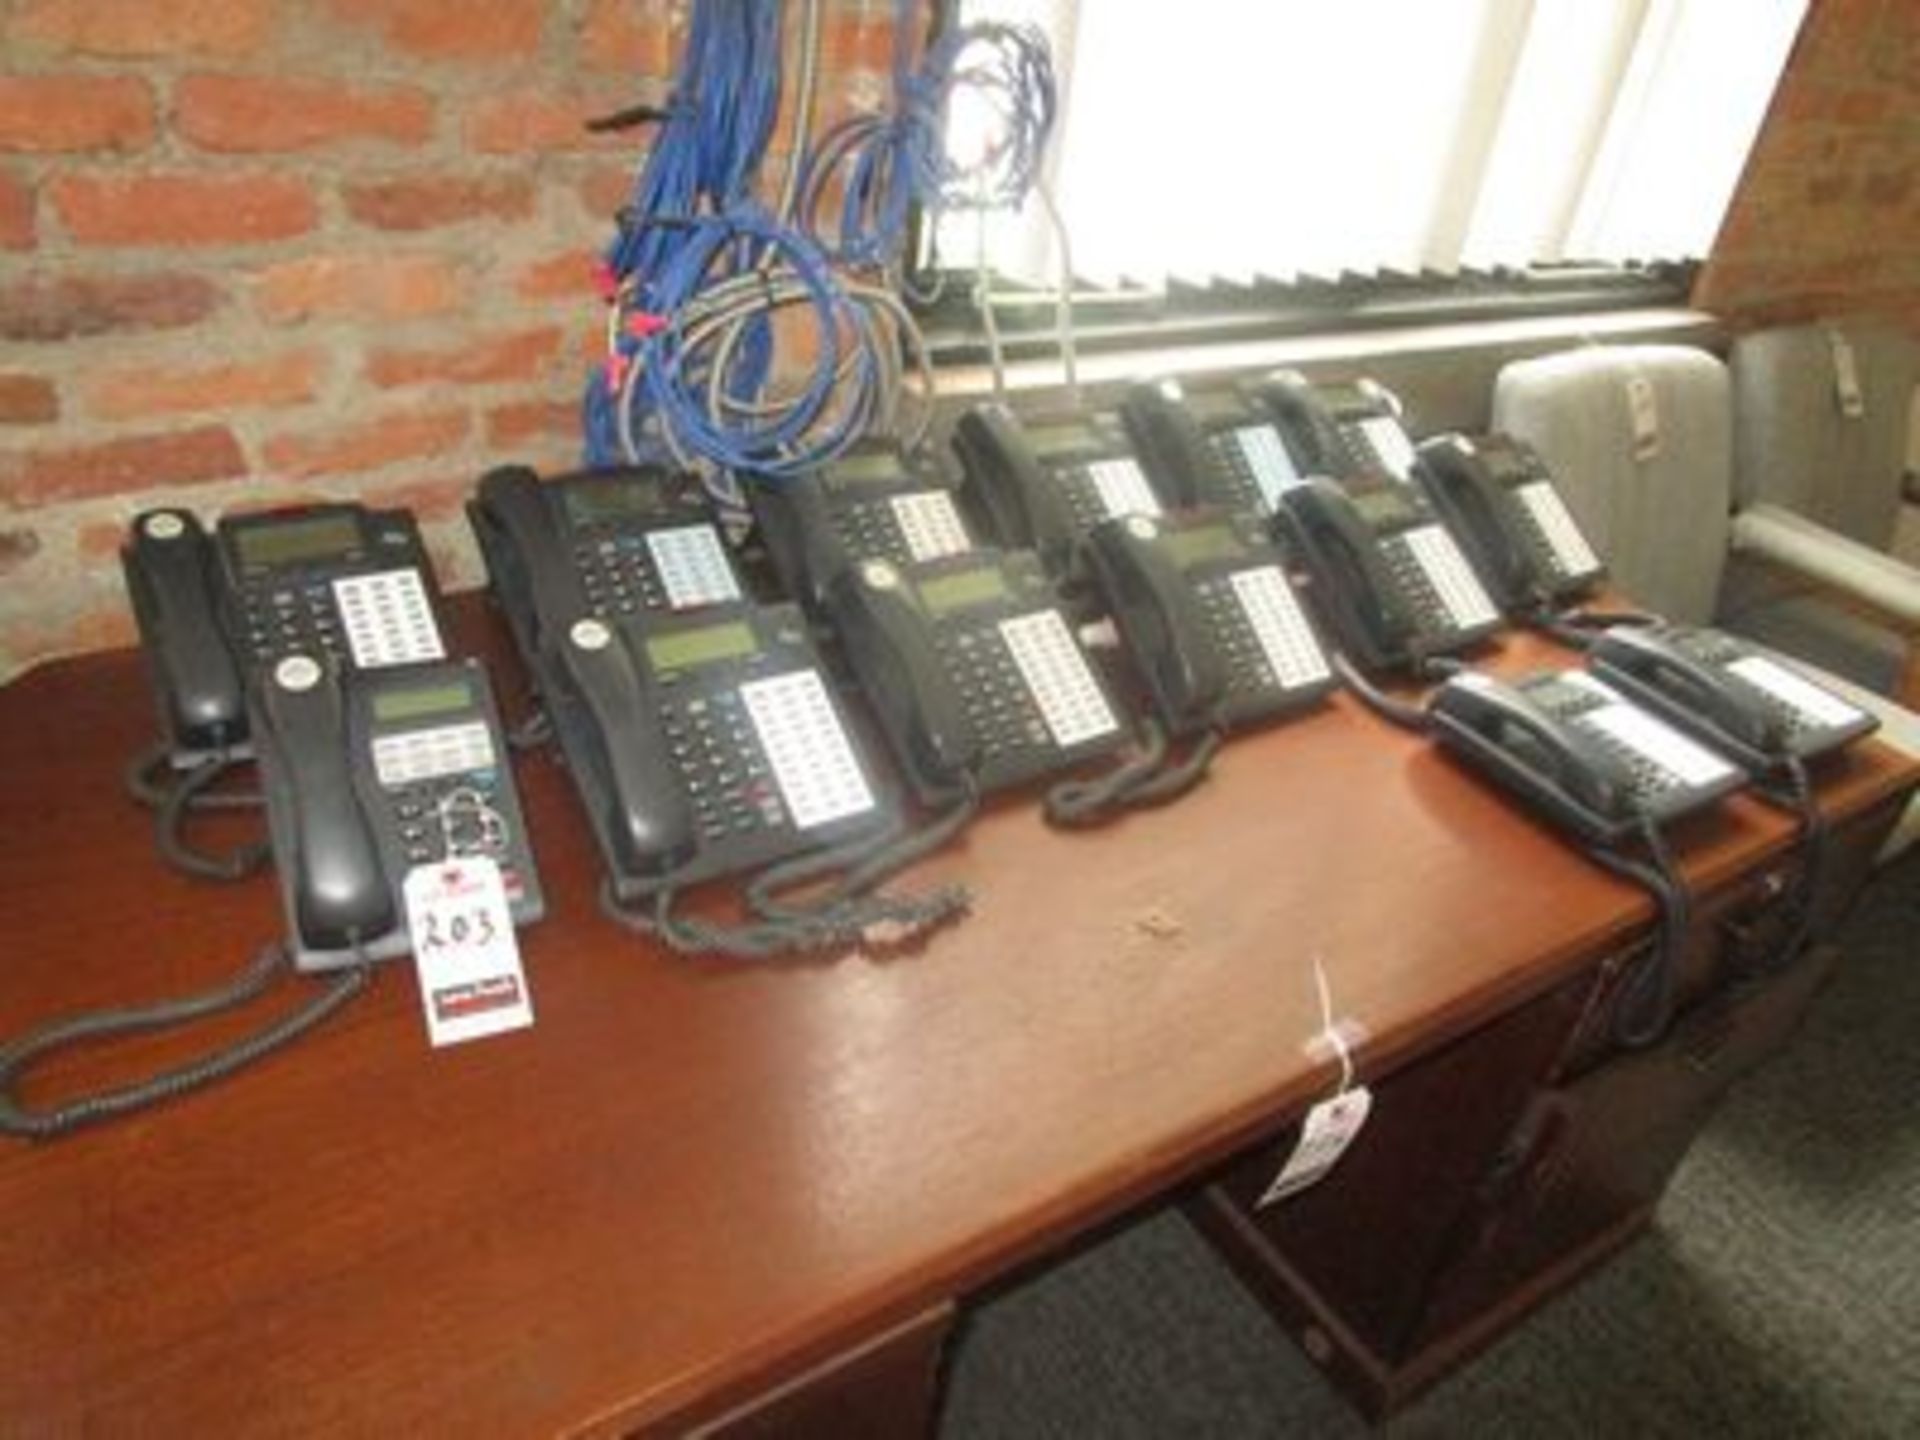 ESI PHONE SYS. 1VX-S CLASS ALL-IN-ONE DIG. PHONE SYSTEM W/ (14) HANDSETS